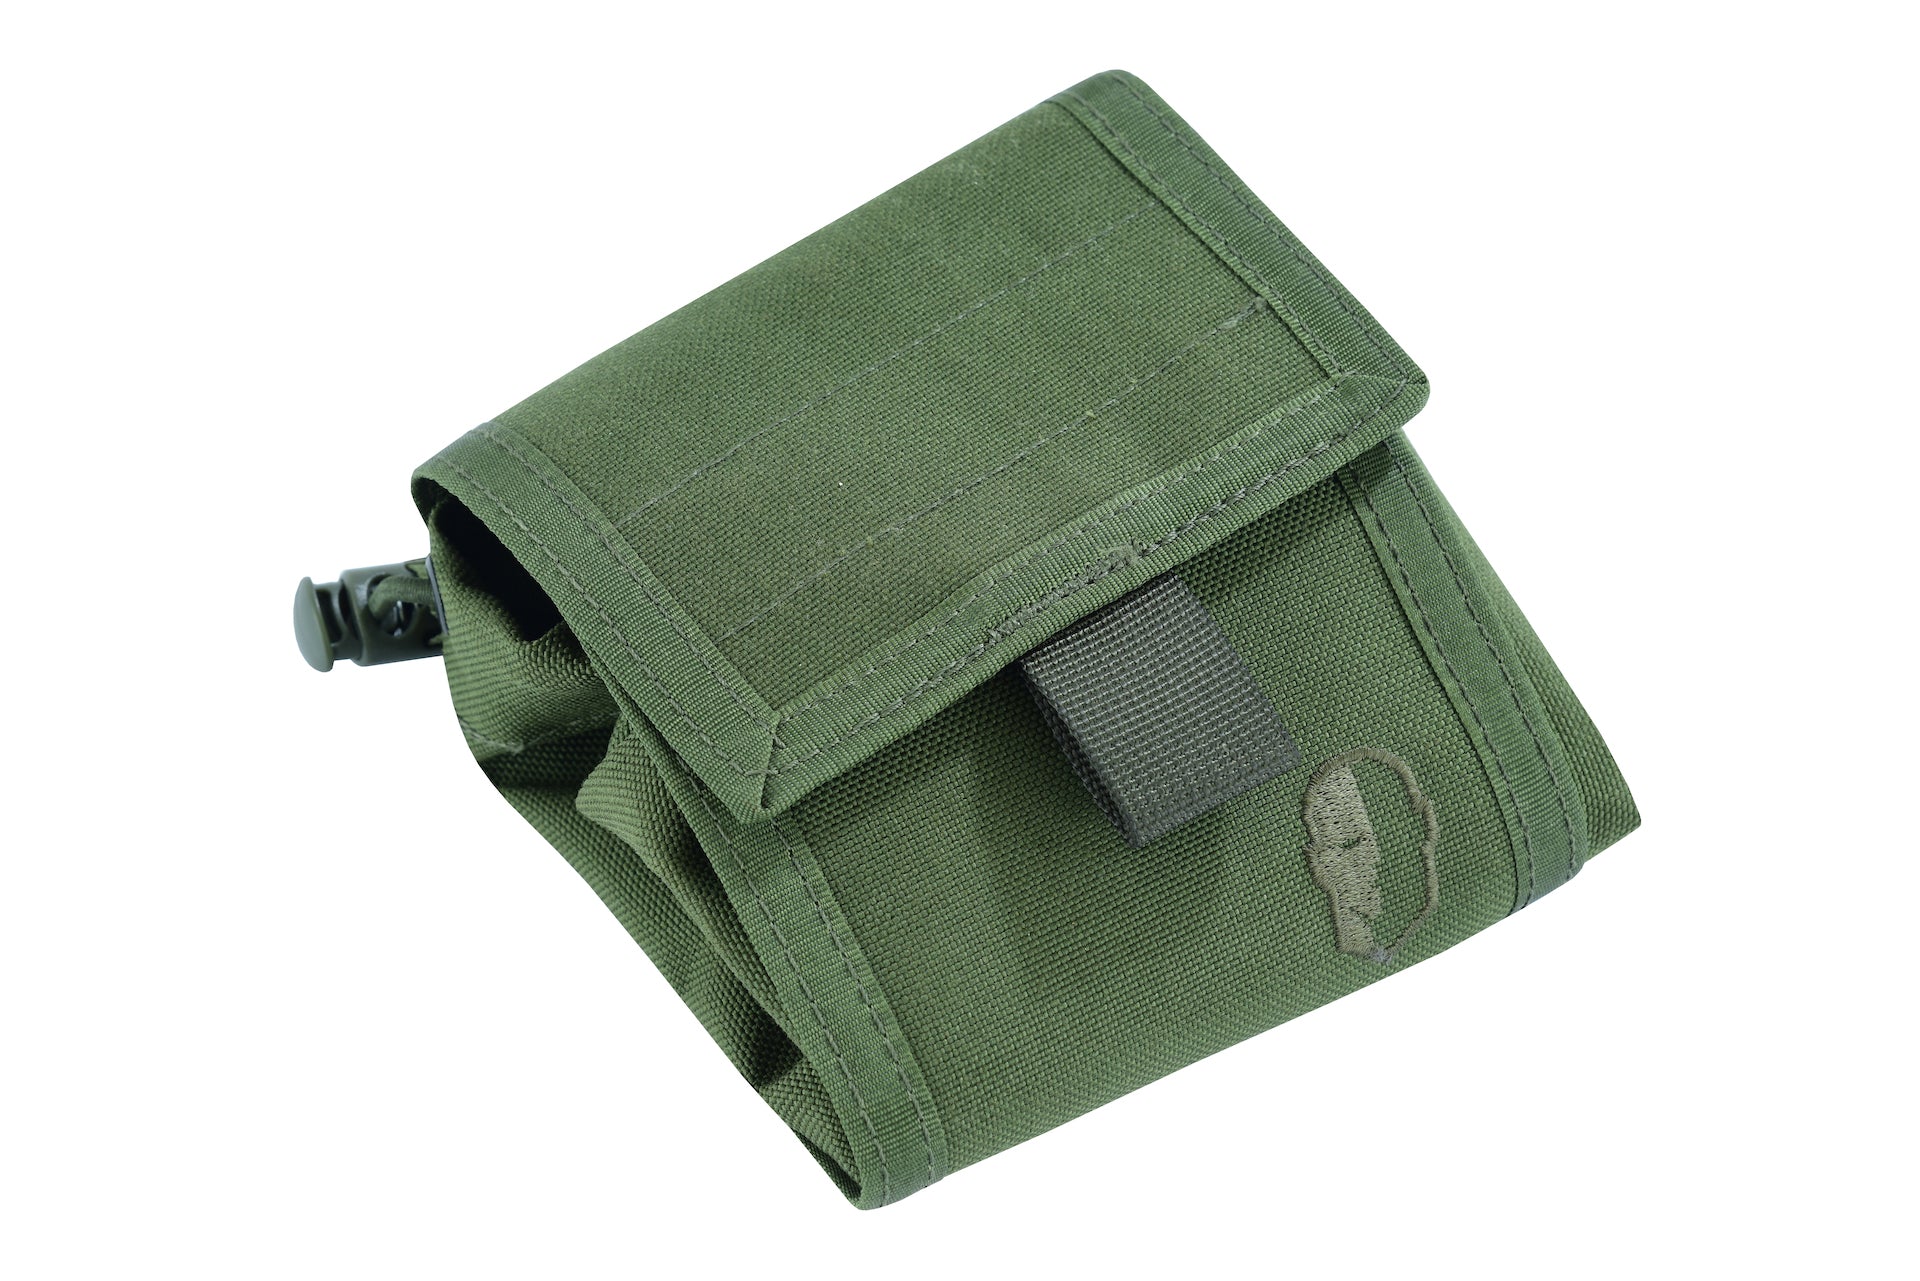 SHE-806 Molle Folding Dump pouch Color Olive Green